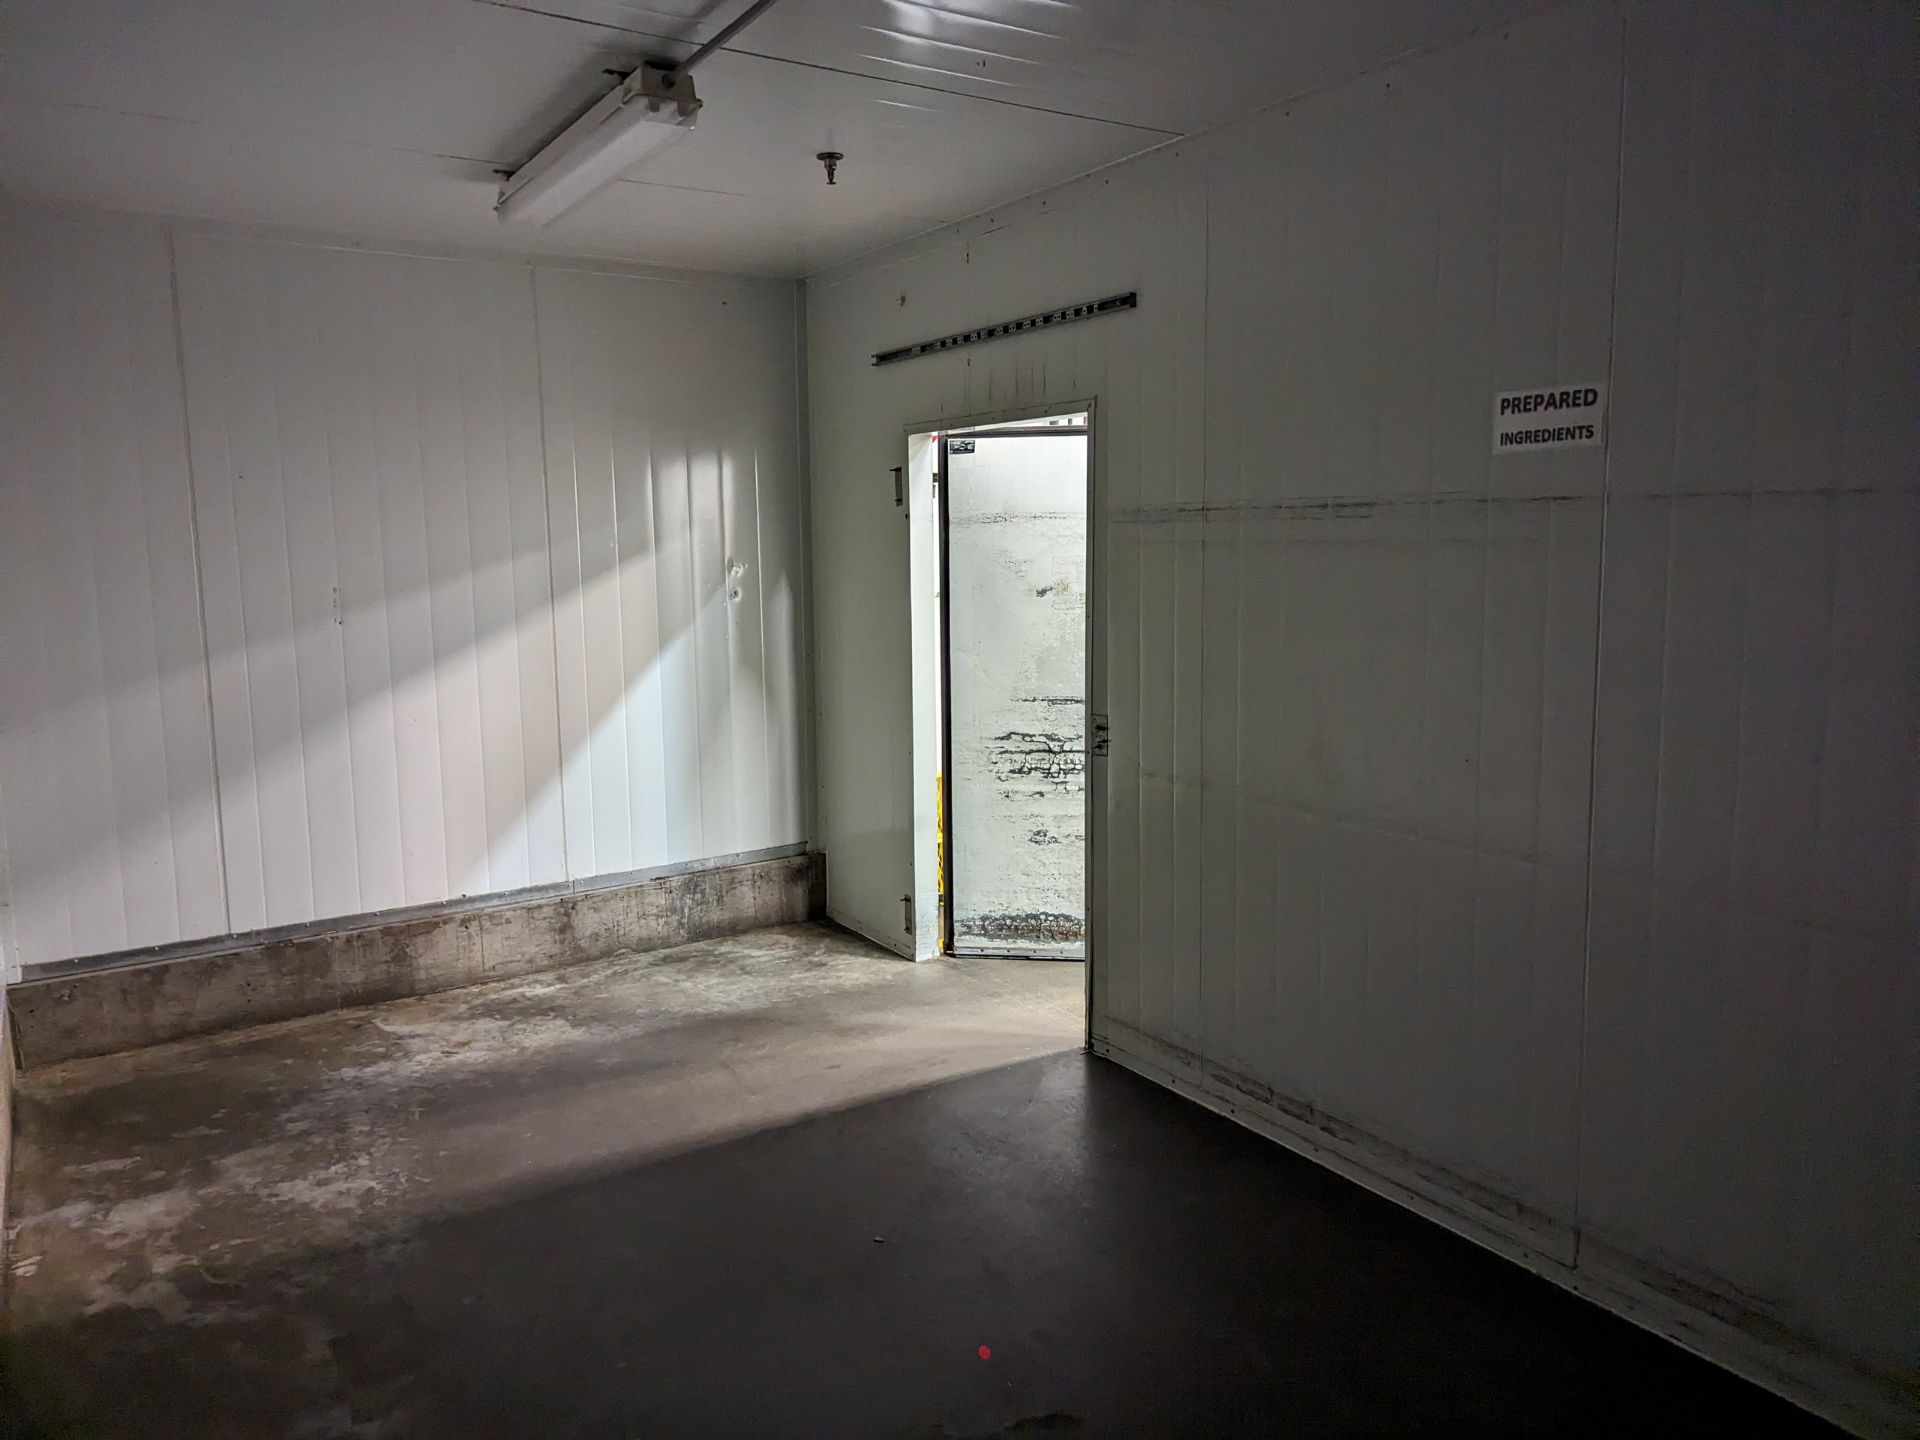 Two Room Walk In Cooler, Overall 33' x 10' x 113" Does not include rear wall. Evaporators - Image 9 of 16